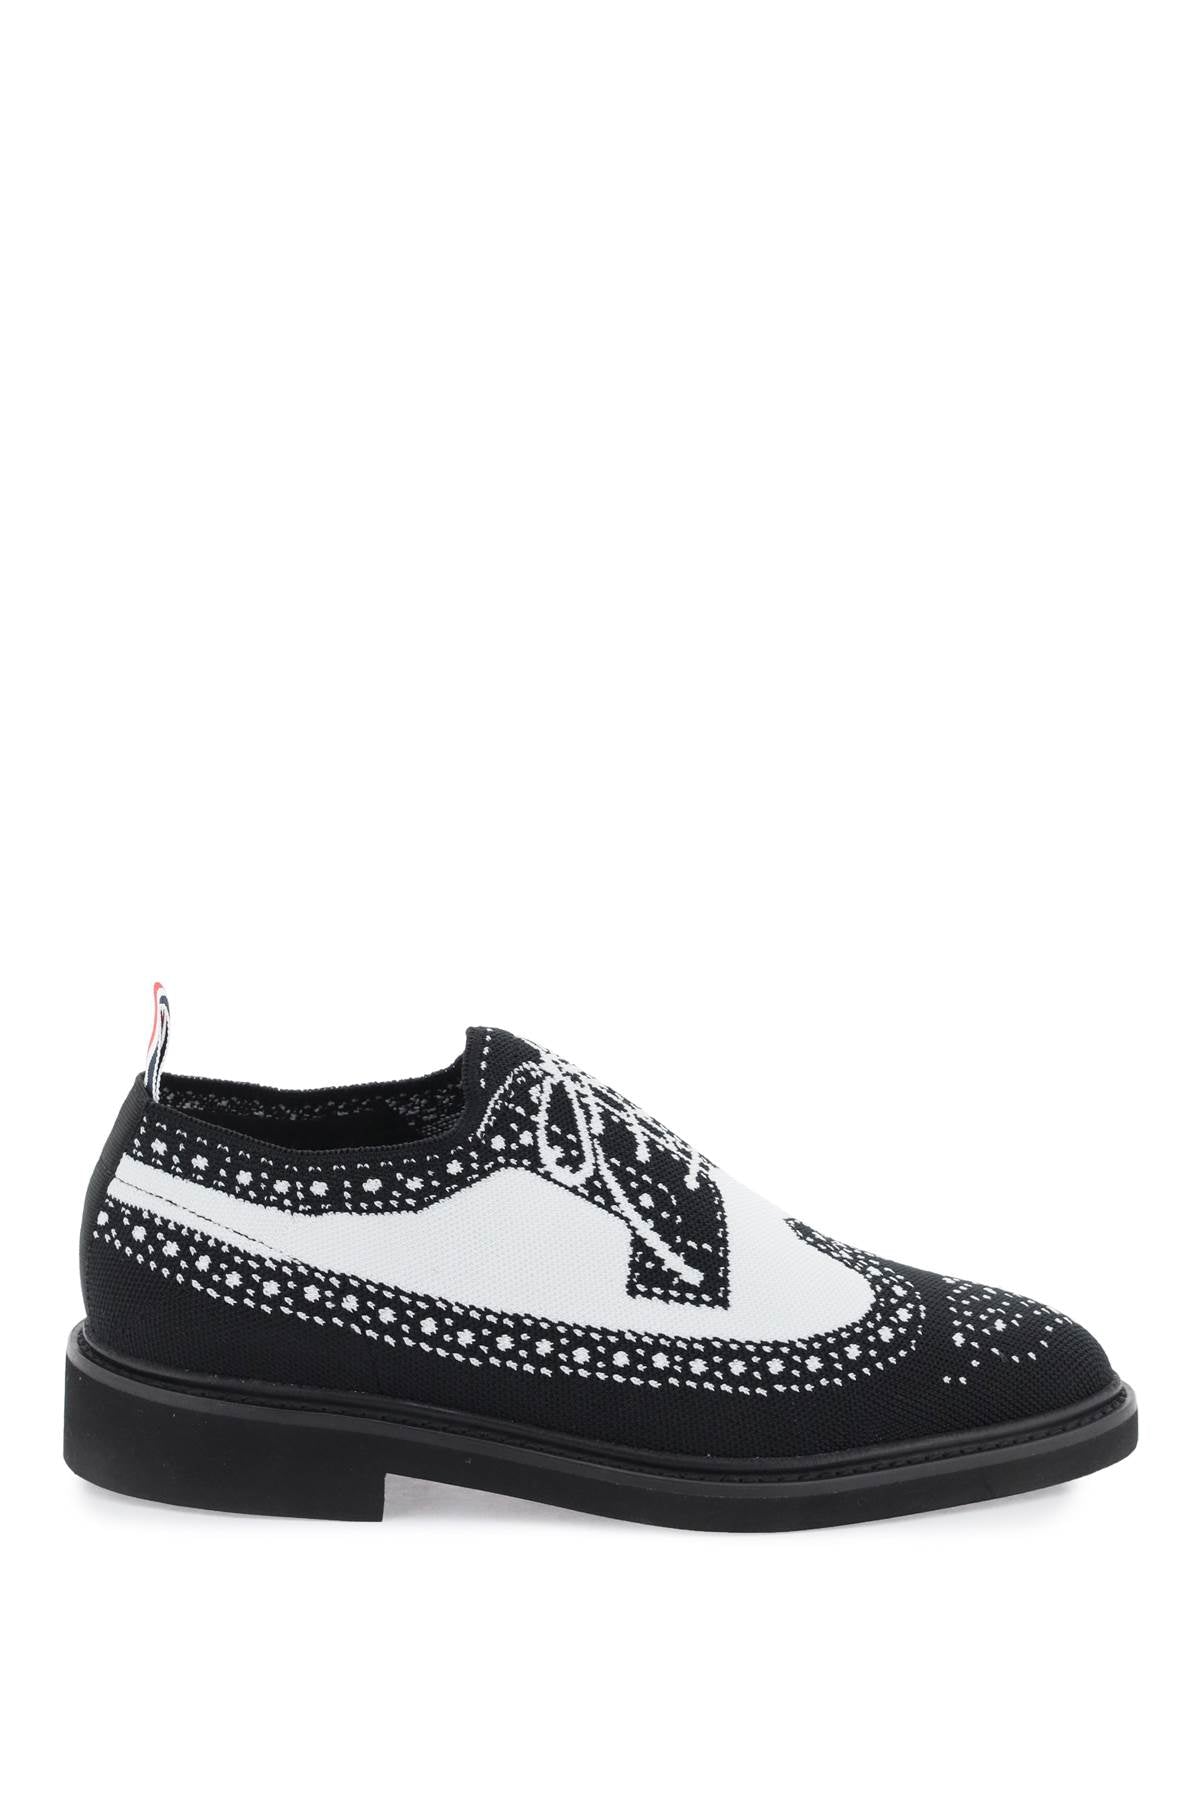 Thom browne longwing brogue loafers in trompe l'oeil knit-0